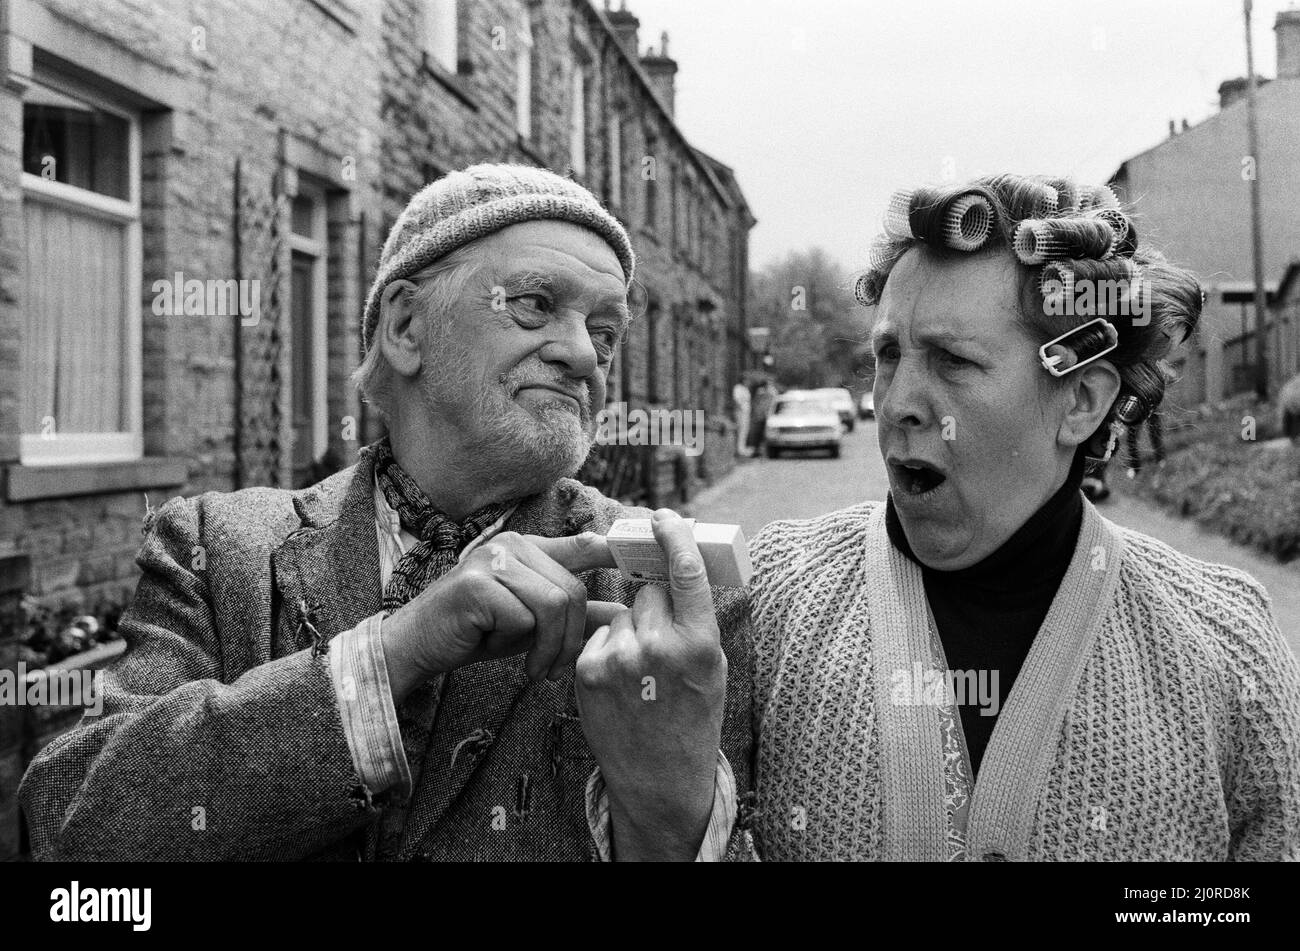 Bill Owen (Compo) and Kathy Staff (Nora Batty) on the set of 'Last of the Summer Wine'. 27th May 1983. Stock Photo